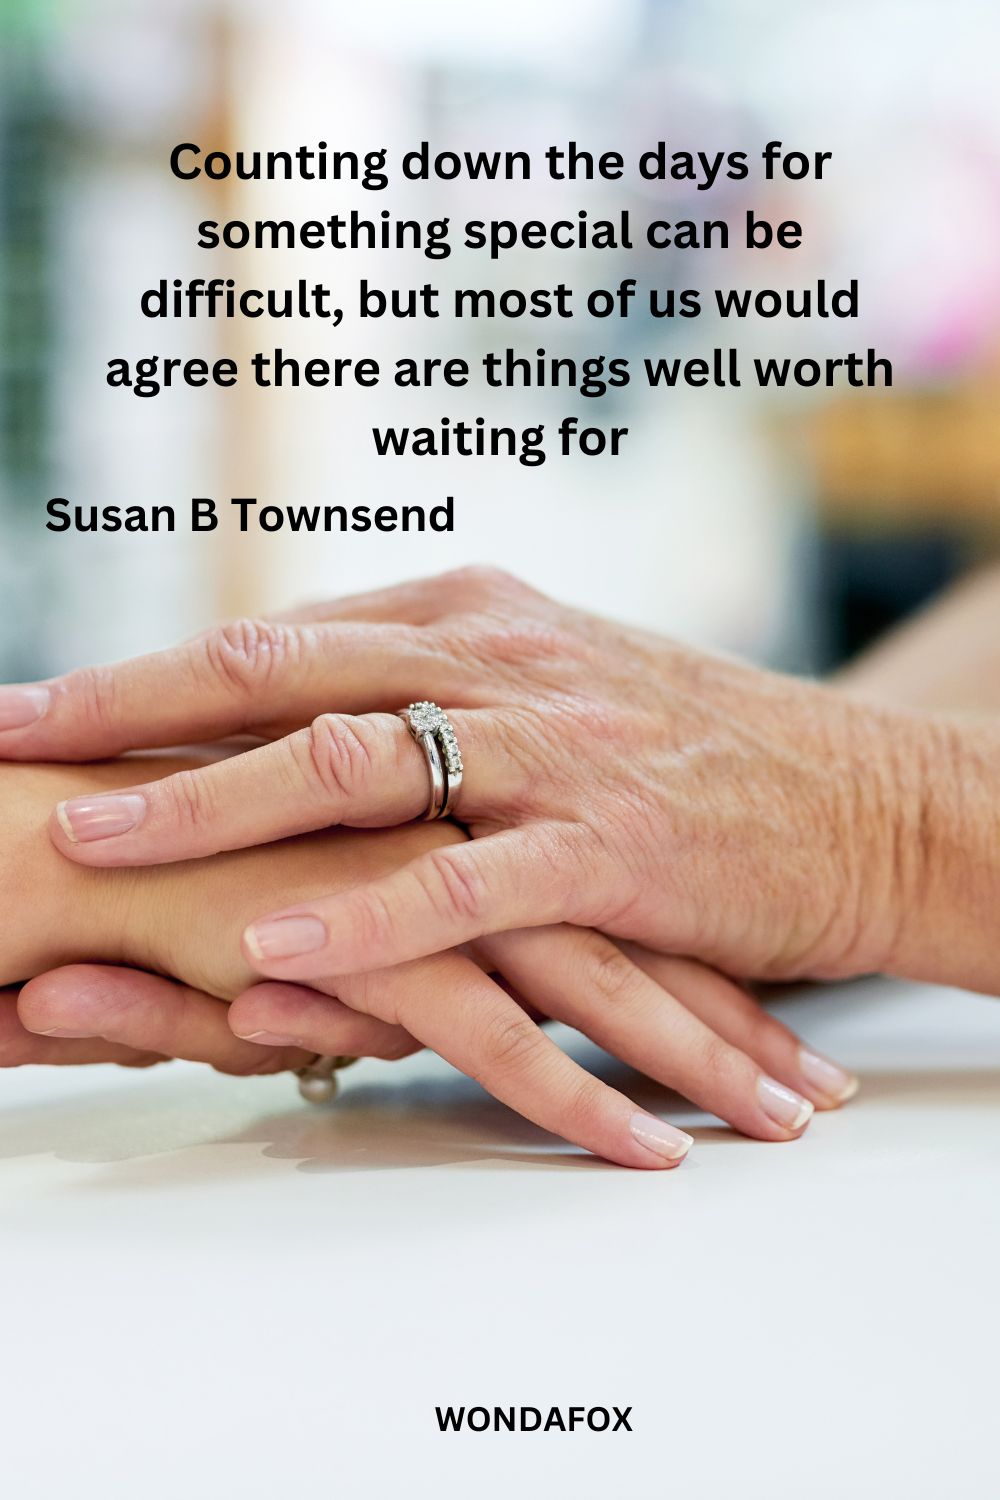 Counting down the days for something special can be difficult, but most of us would agree there are things well worth waiting for
Susan B Townsend